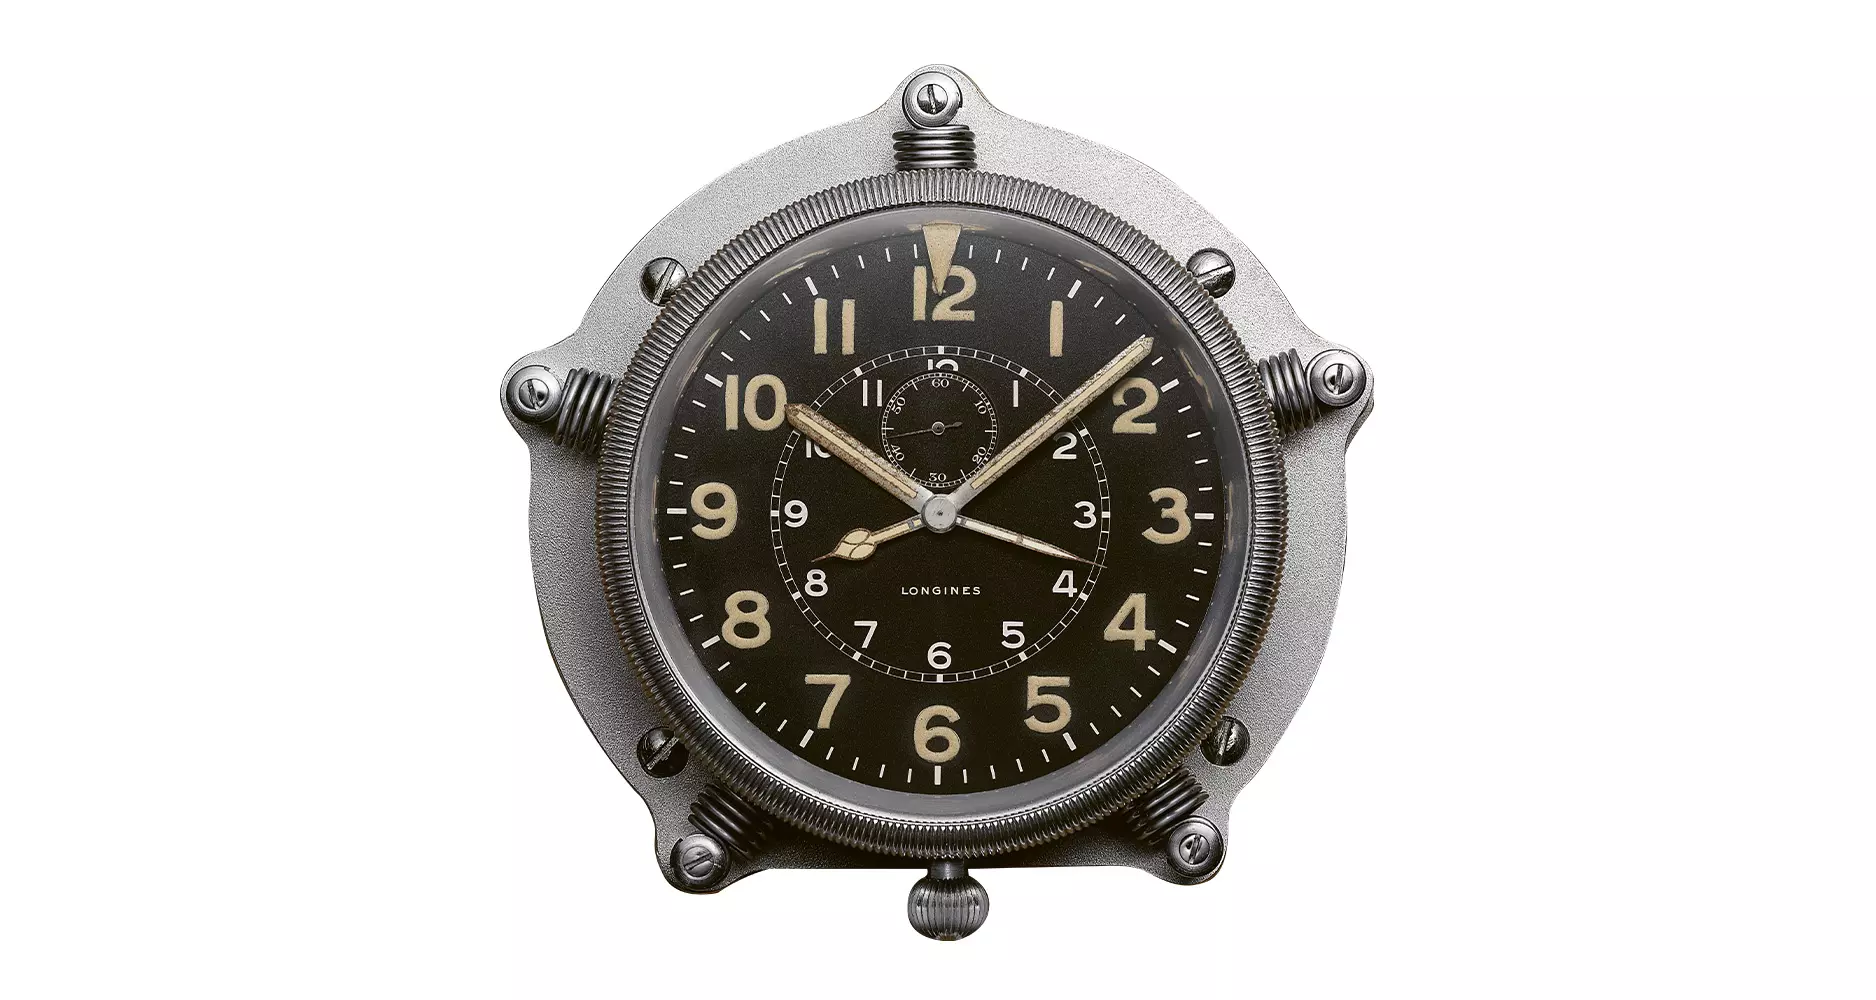 An aviation dashboard clock with dual time zones and the start of flight indicator.